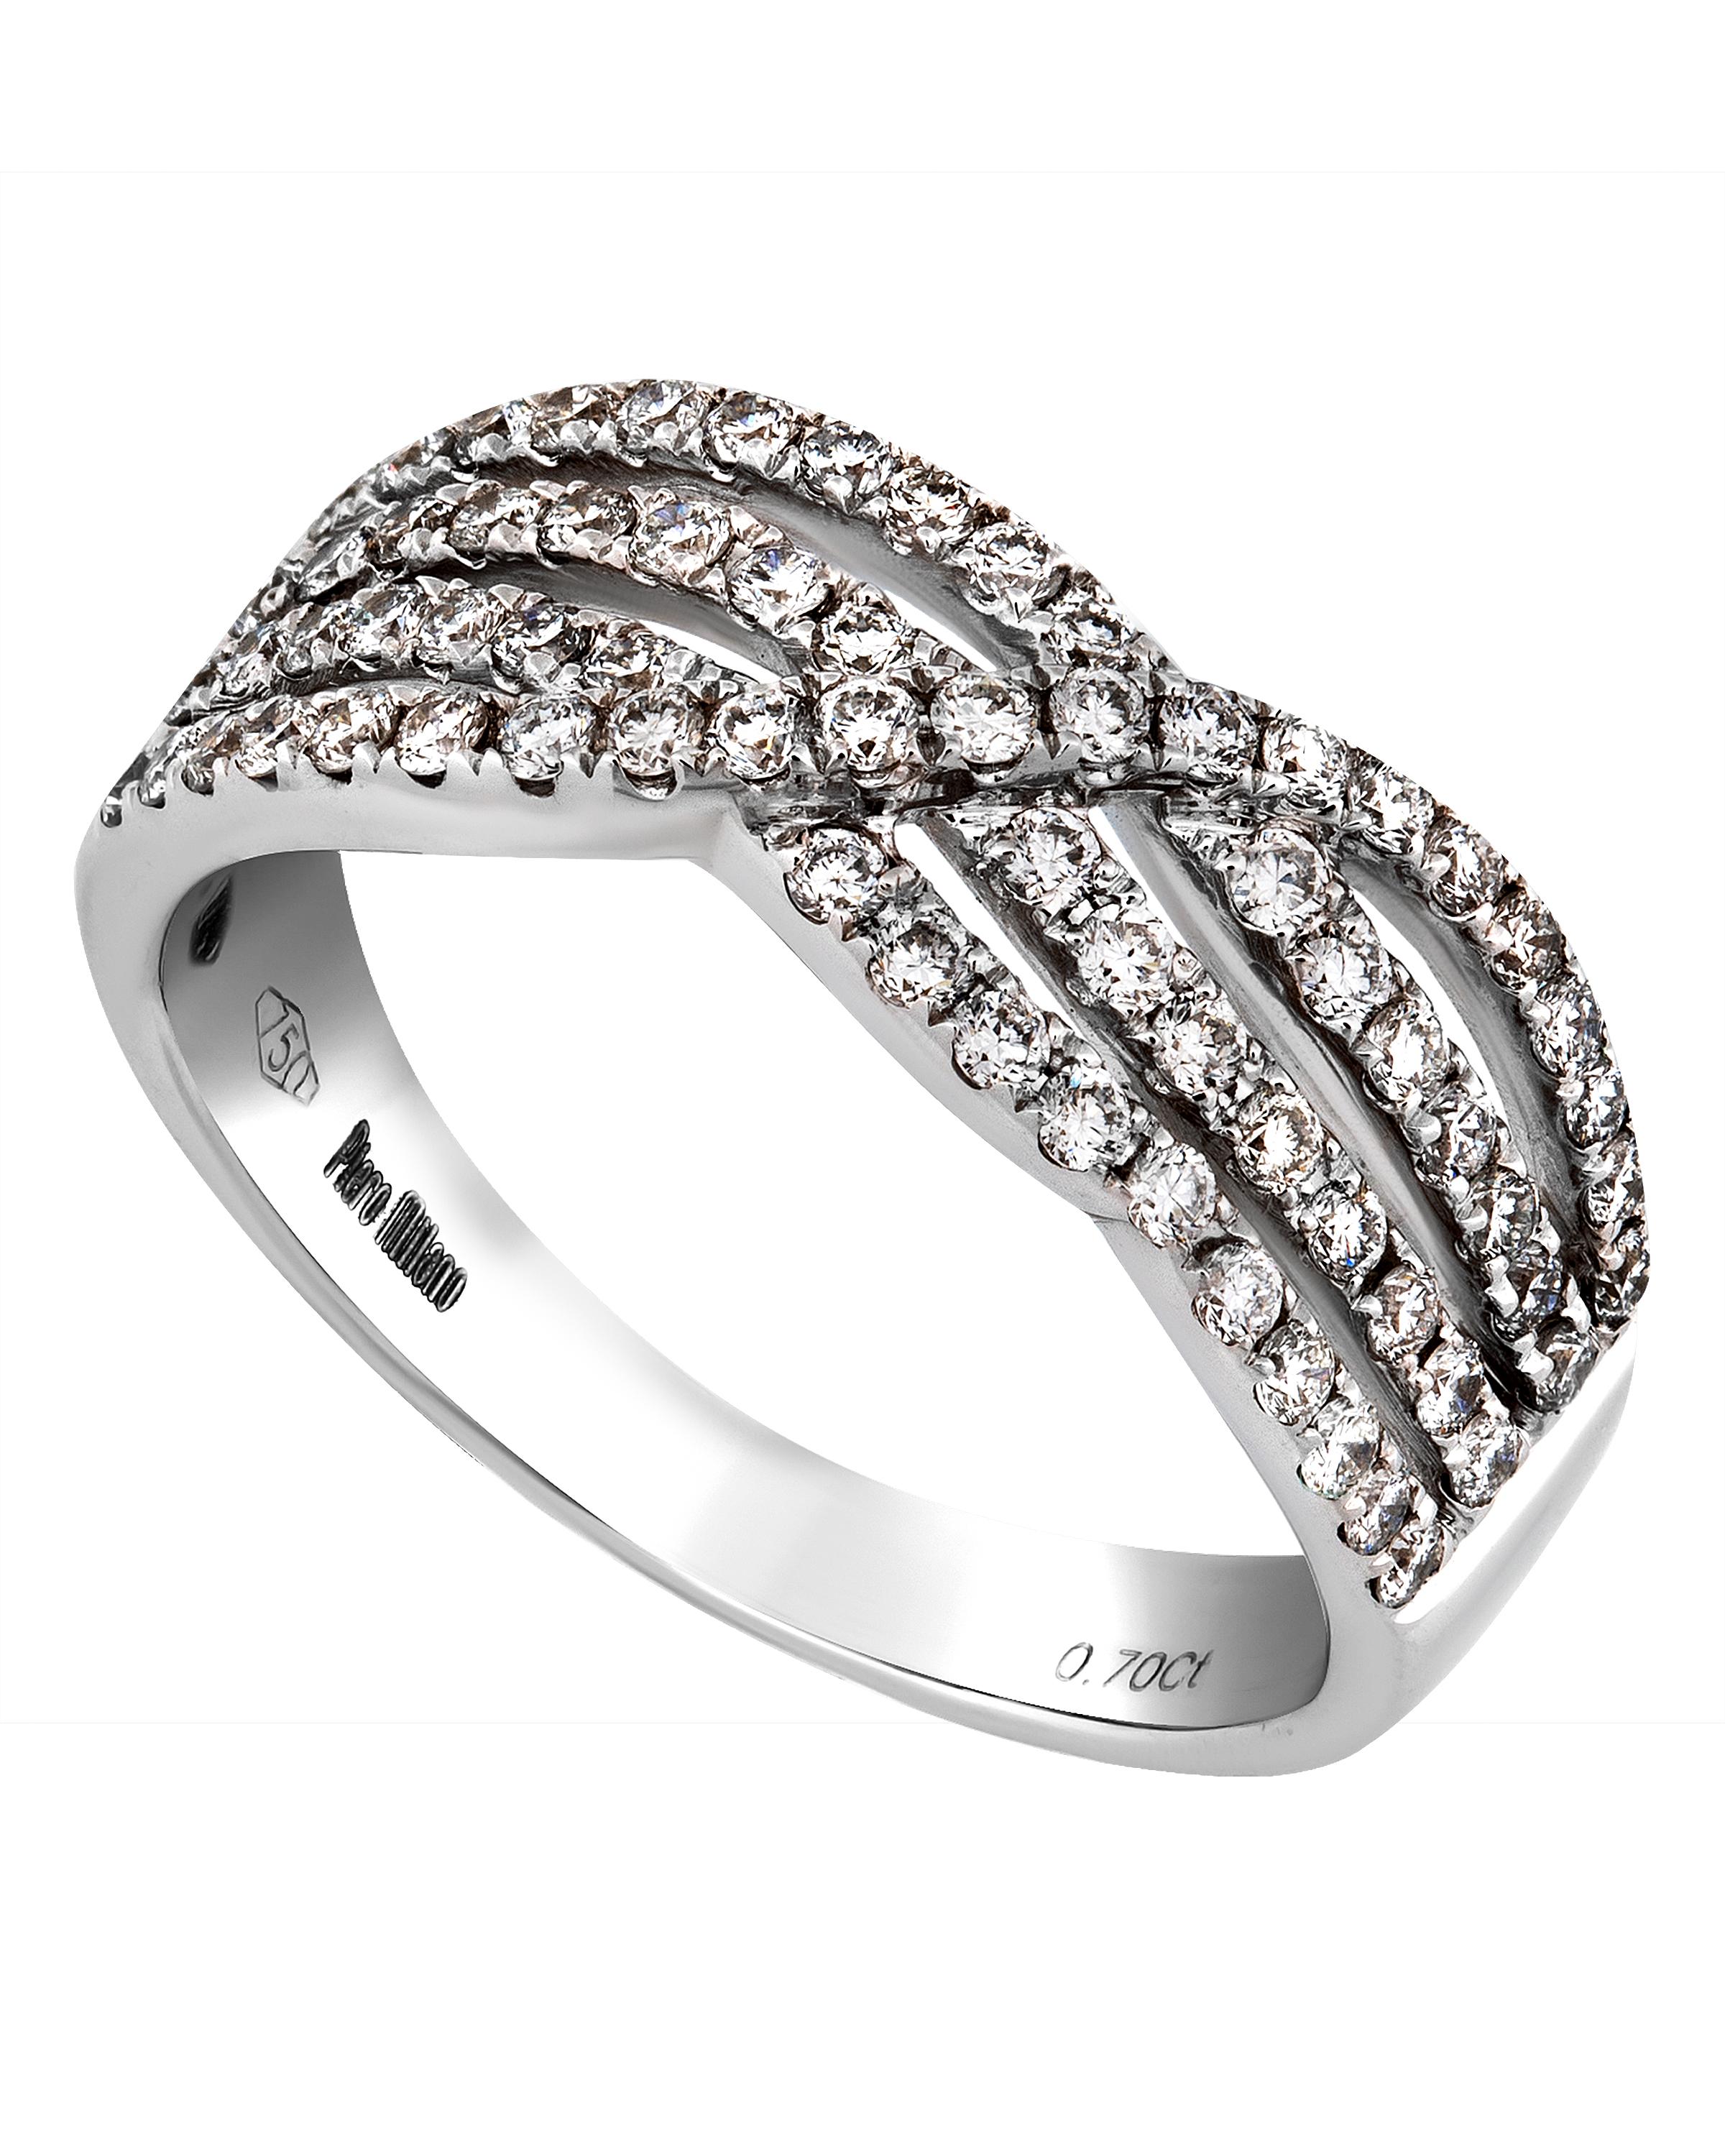 This graceful Piero Milano 18K White Gold Highway Ring features a waved diamond strand overlapping three glittering layers of diamond pave 0.7ct. tw. The ring size is 7.25 (55.1). The Band Width is 7.7mm. The Weight is 5.1g.
